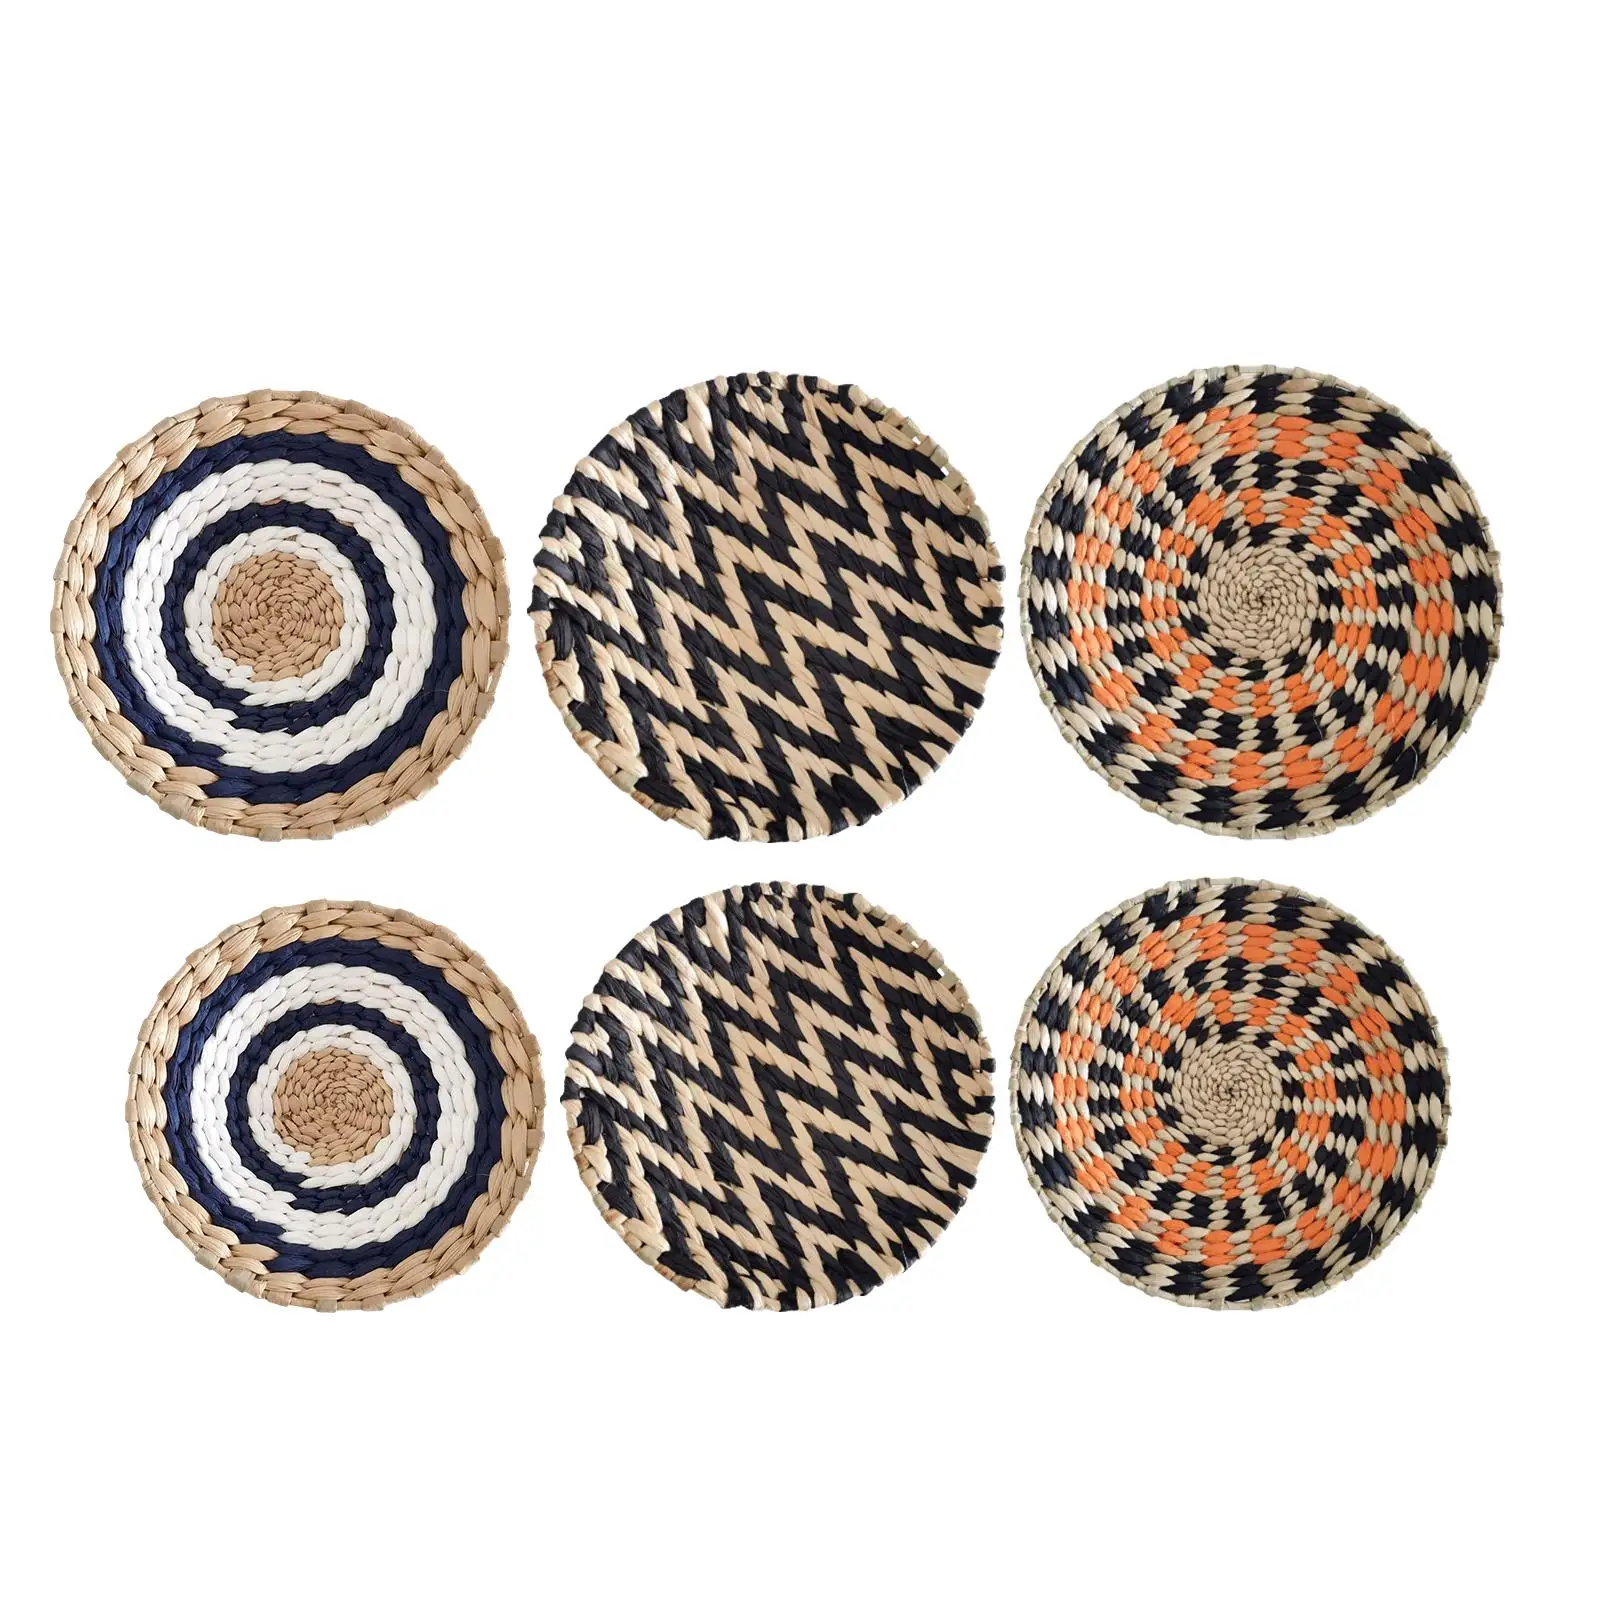 Woven Basket Wall Decor Unique Wall Art Seagrass Basket Handmade Decorative Flat Tray and Baskets for Home Living Room